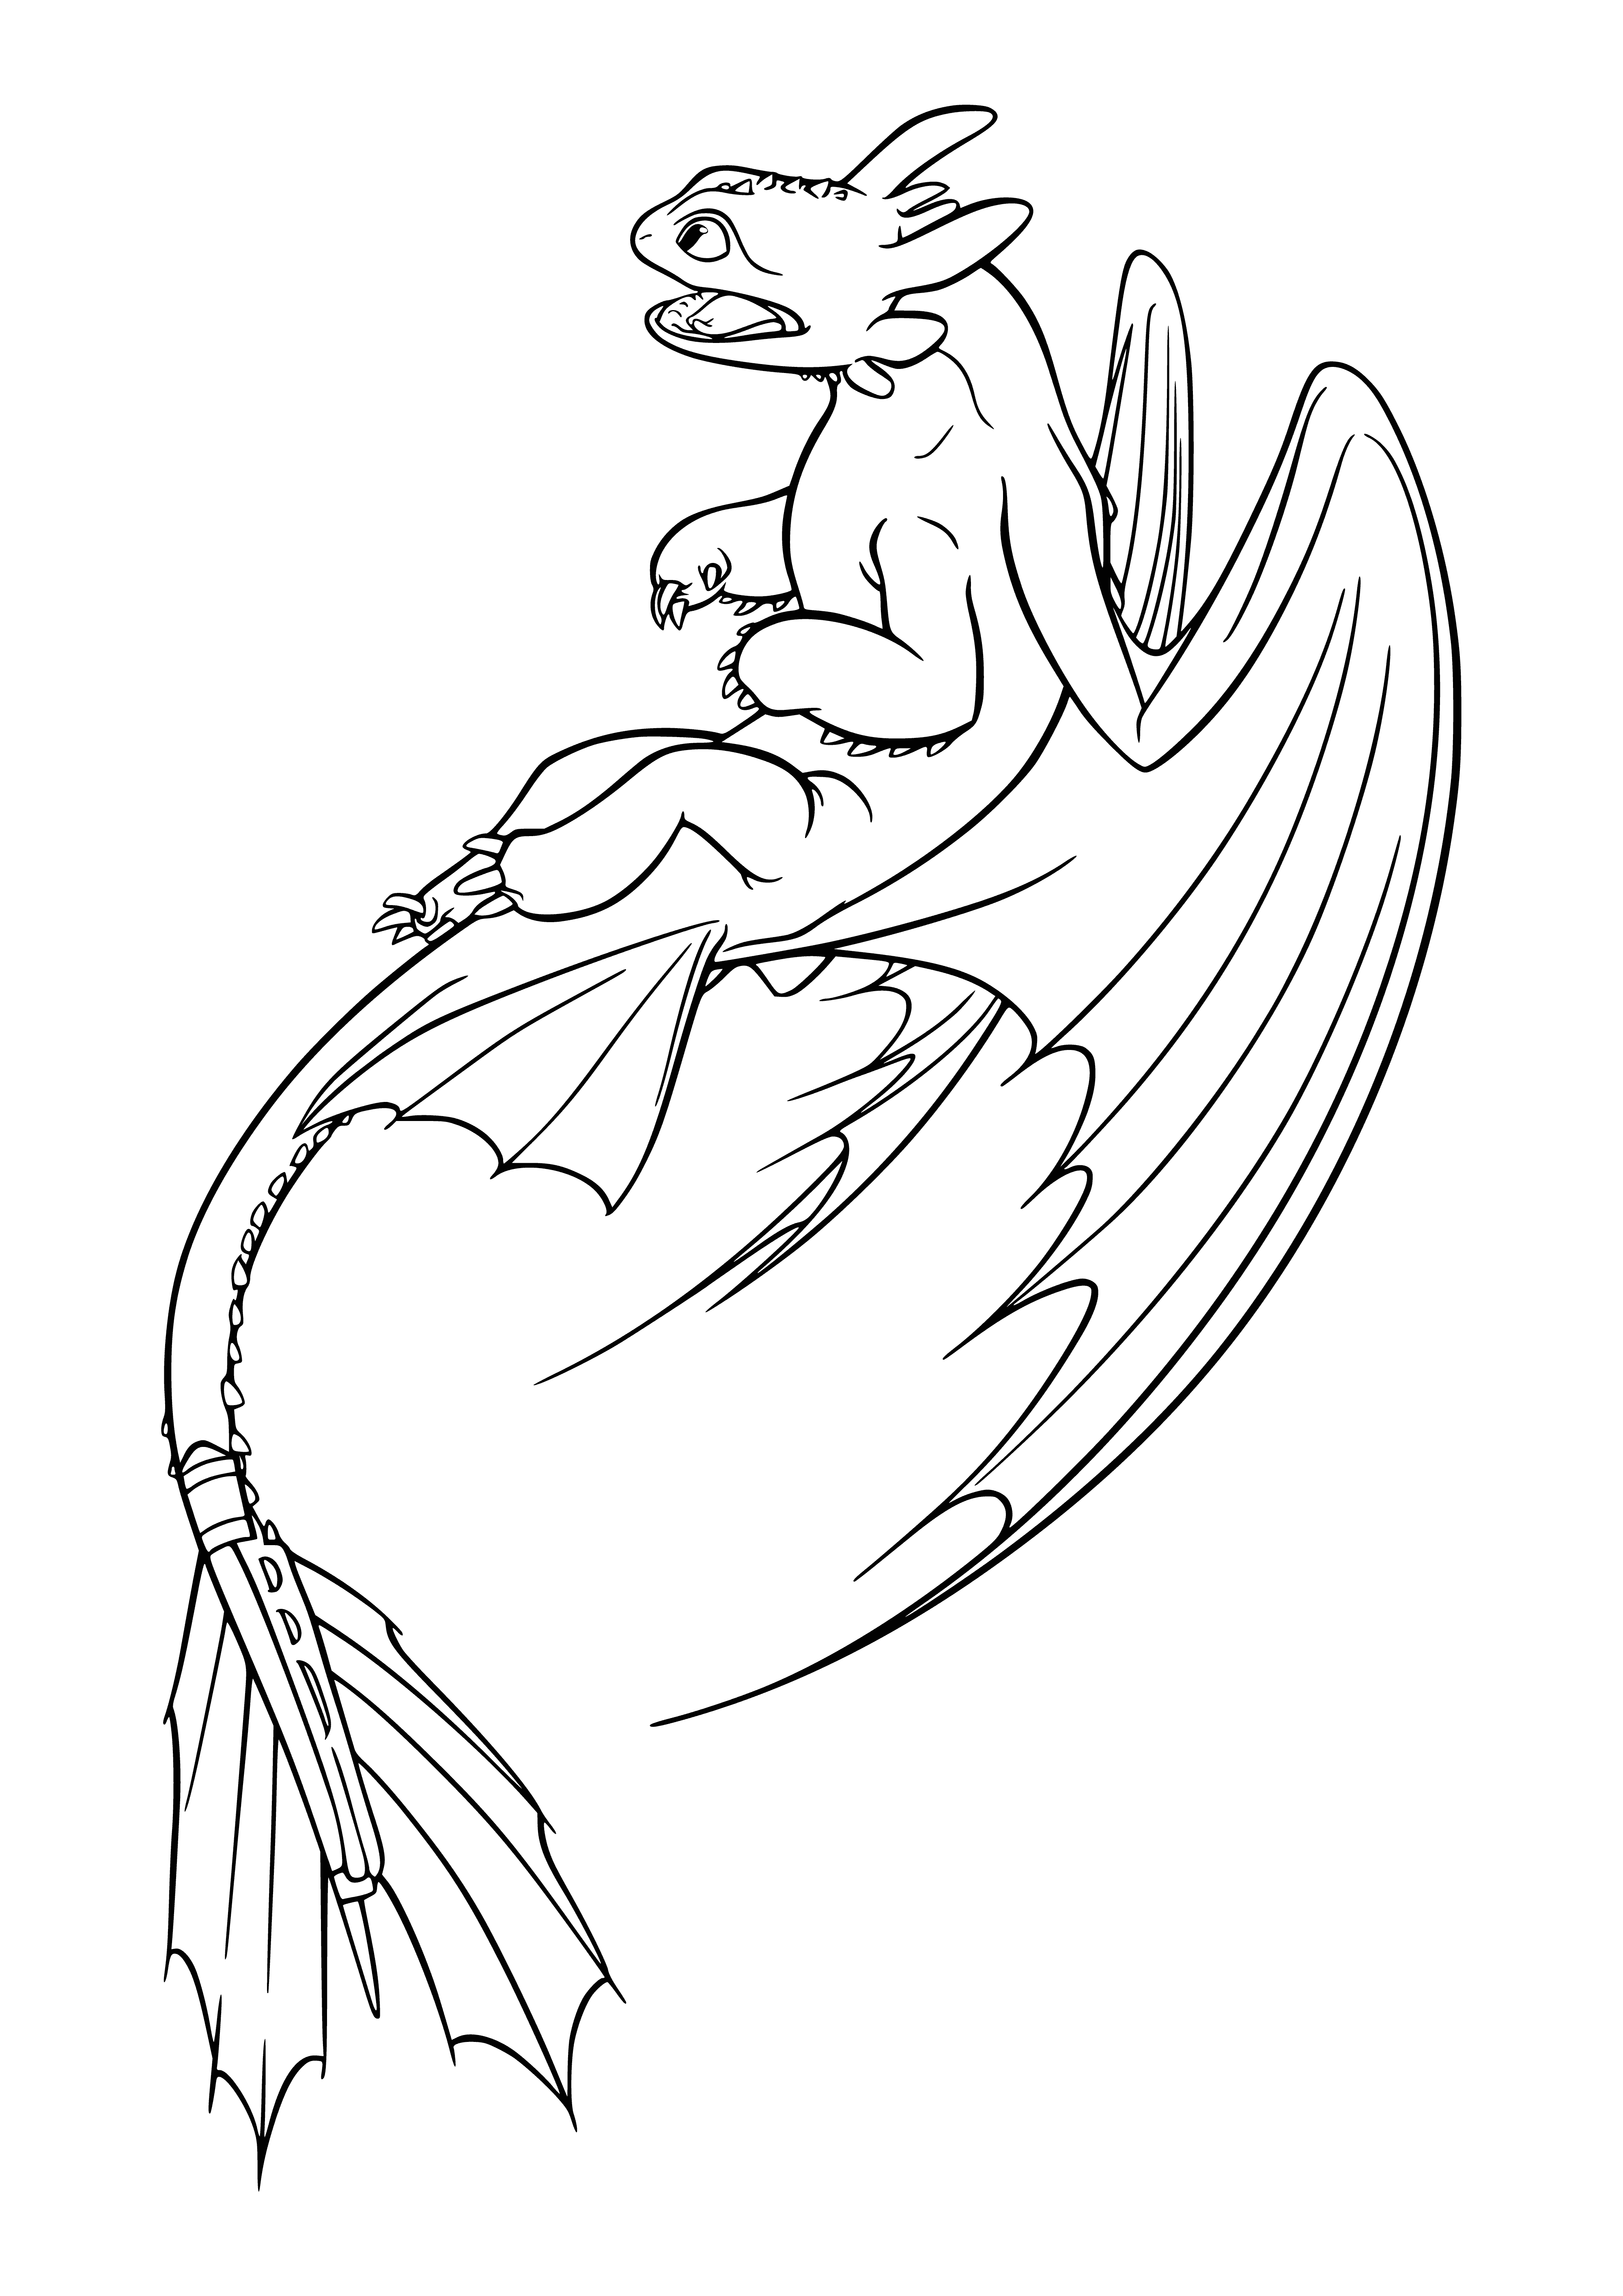 coloring page: Large, blue dragon w/ long, snake-like body & four legs; has large ears, wings, sharp claws & teeth.